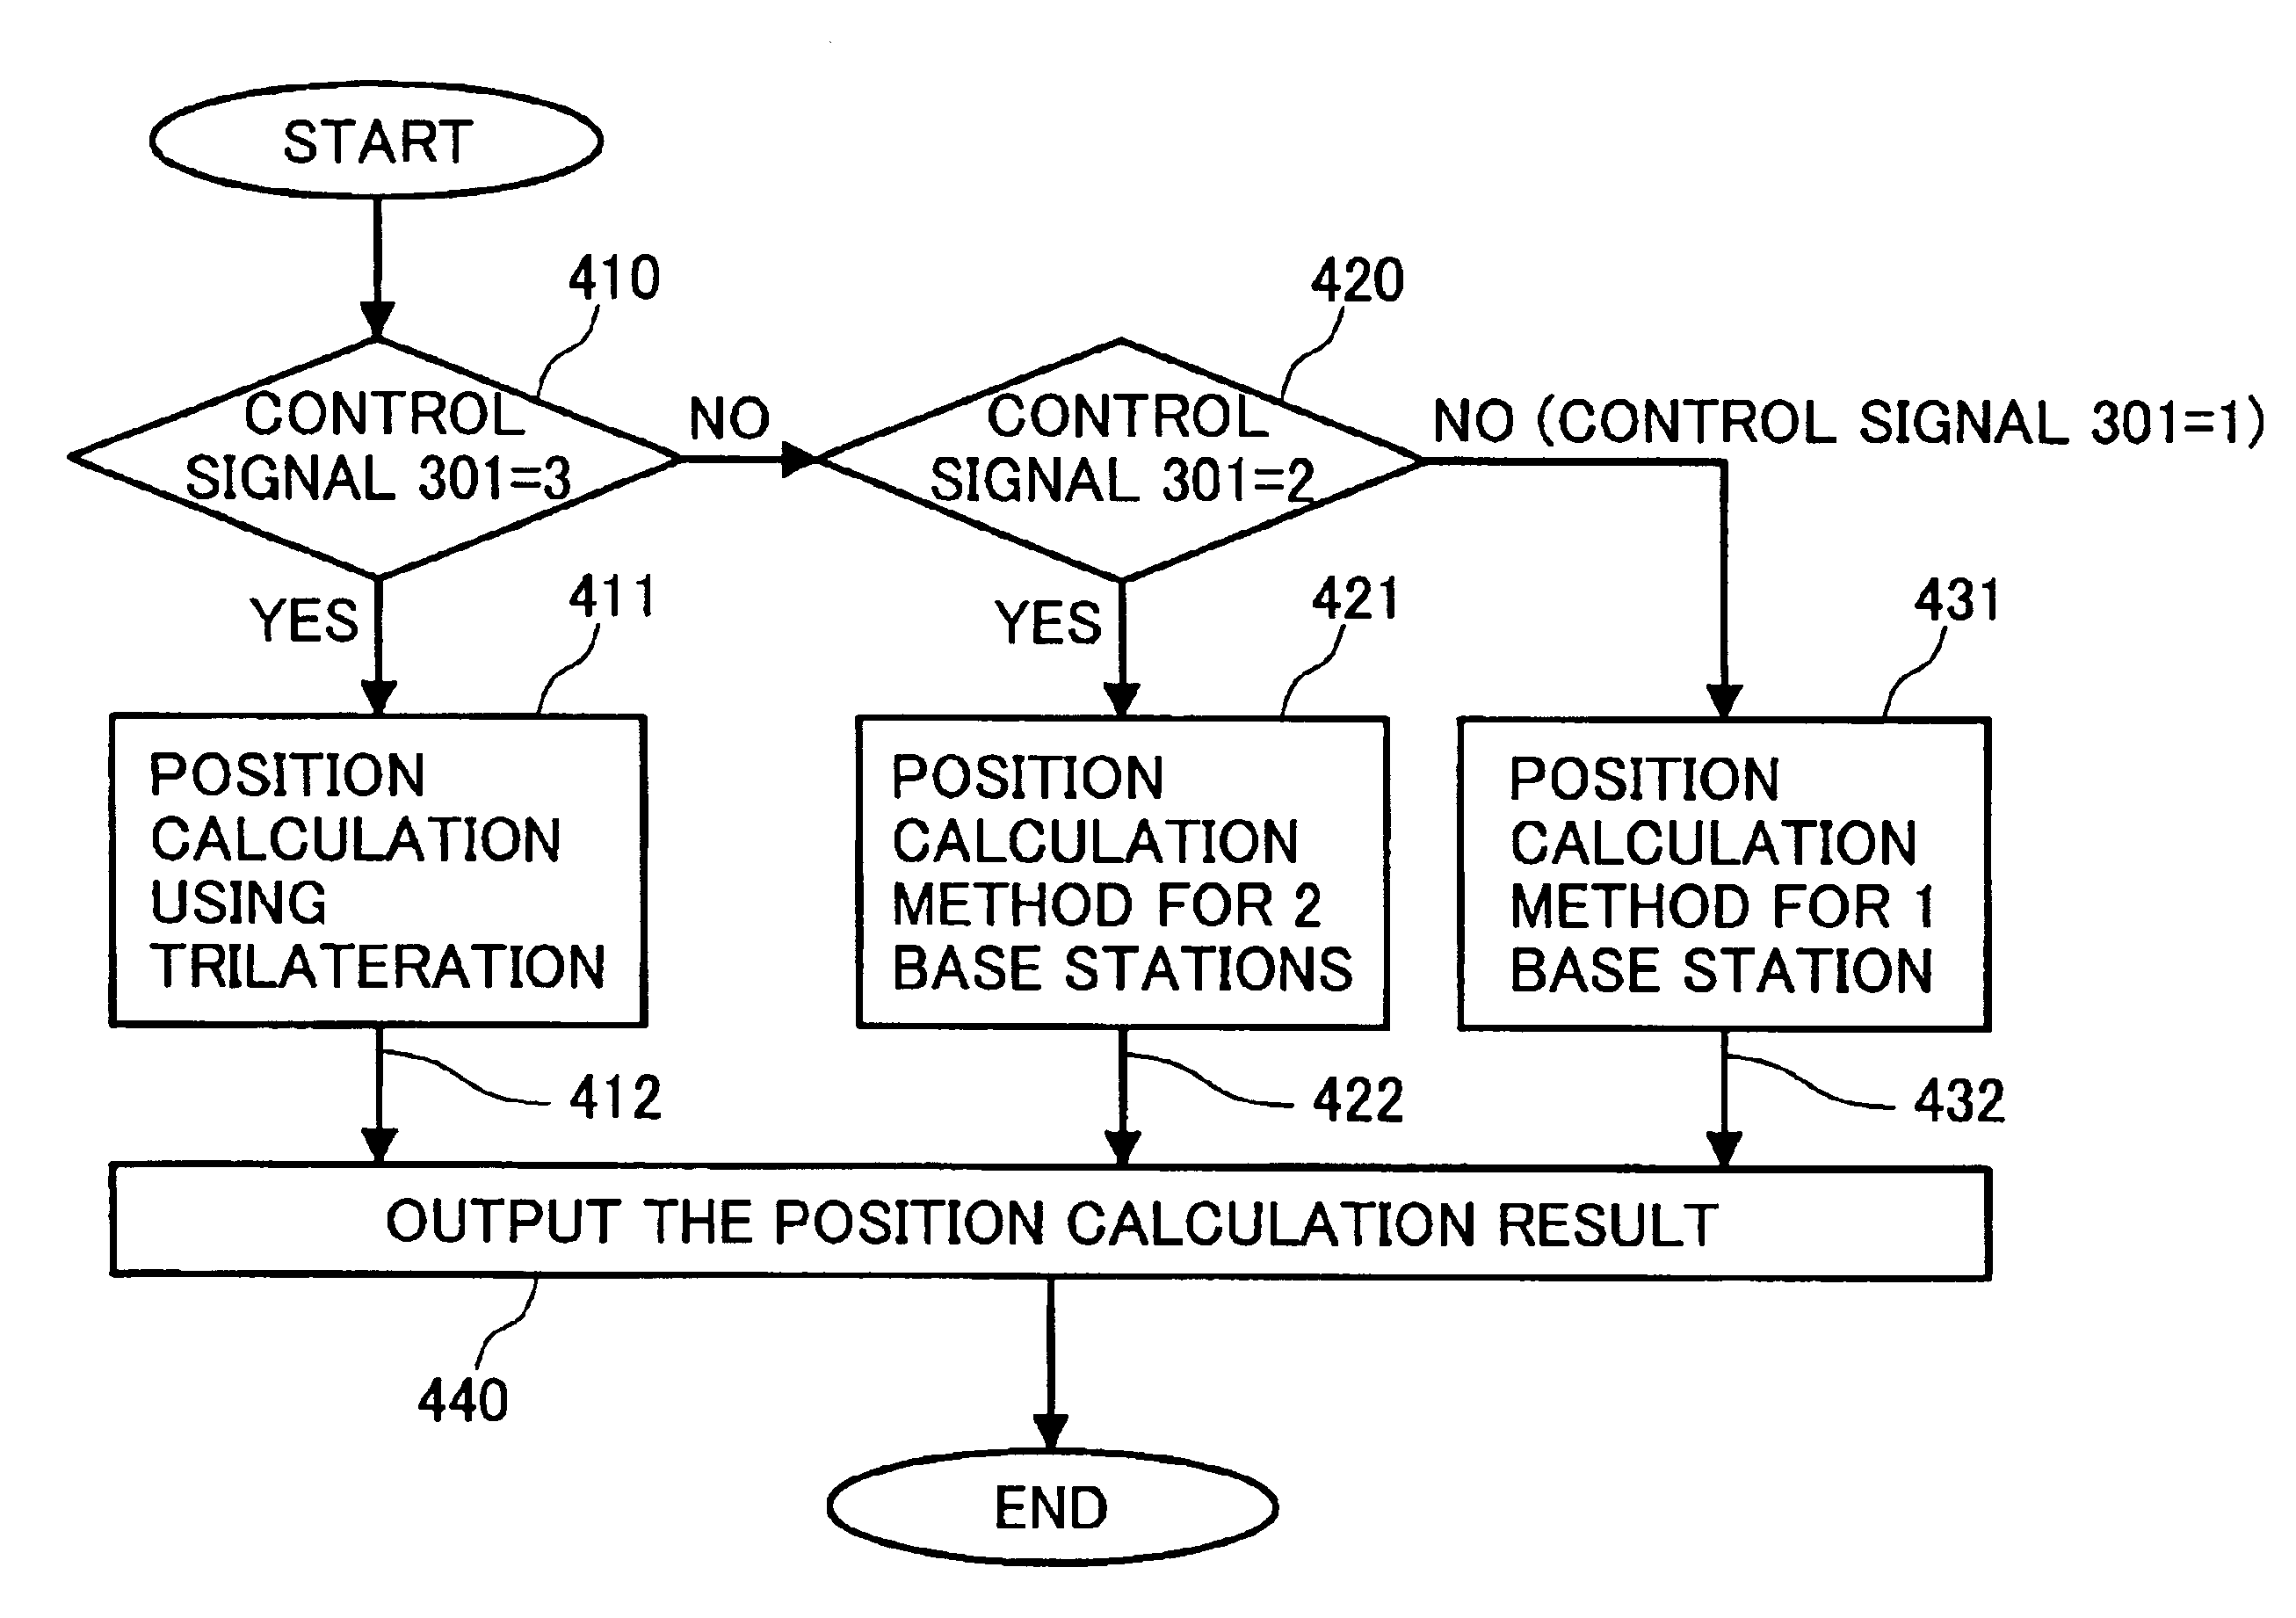 Equipment for the calculation of mobile handset position